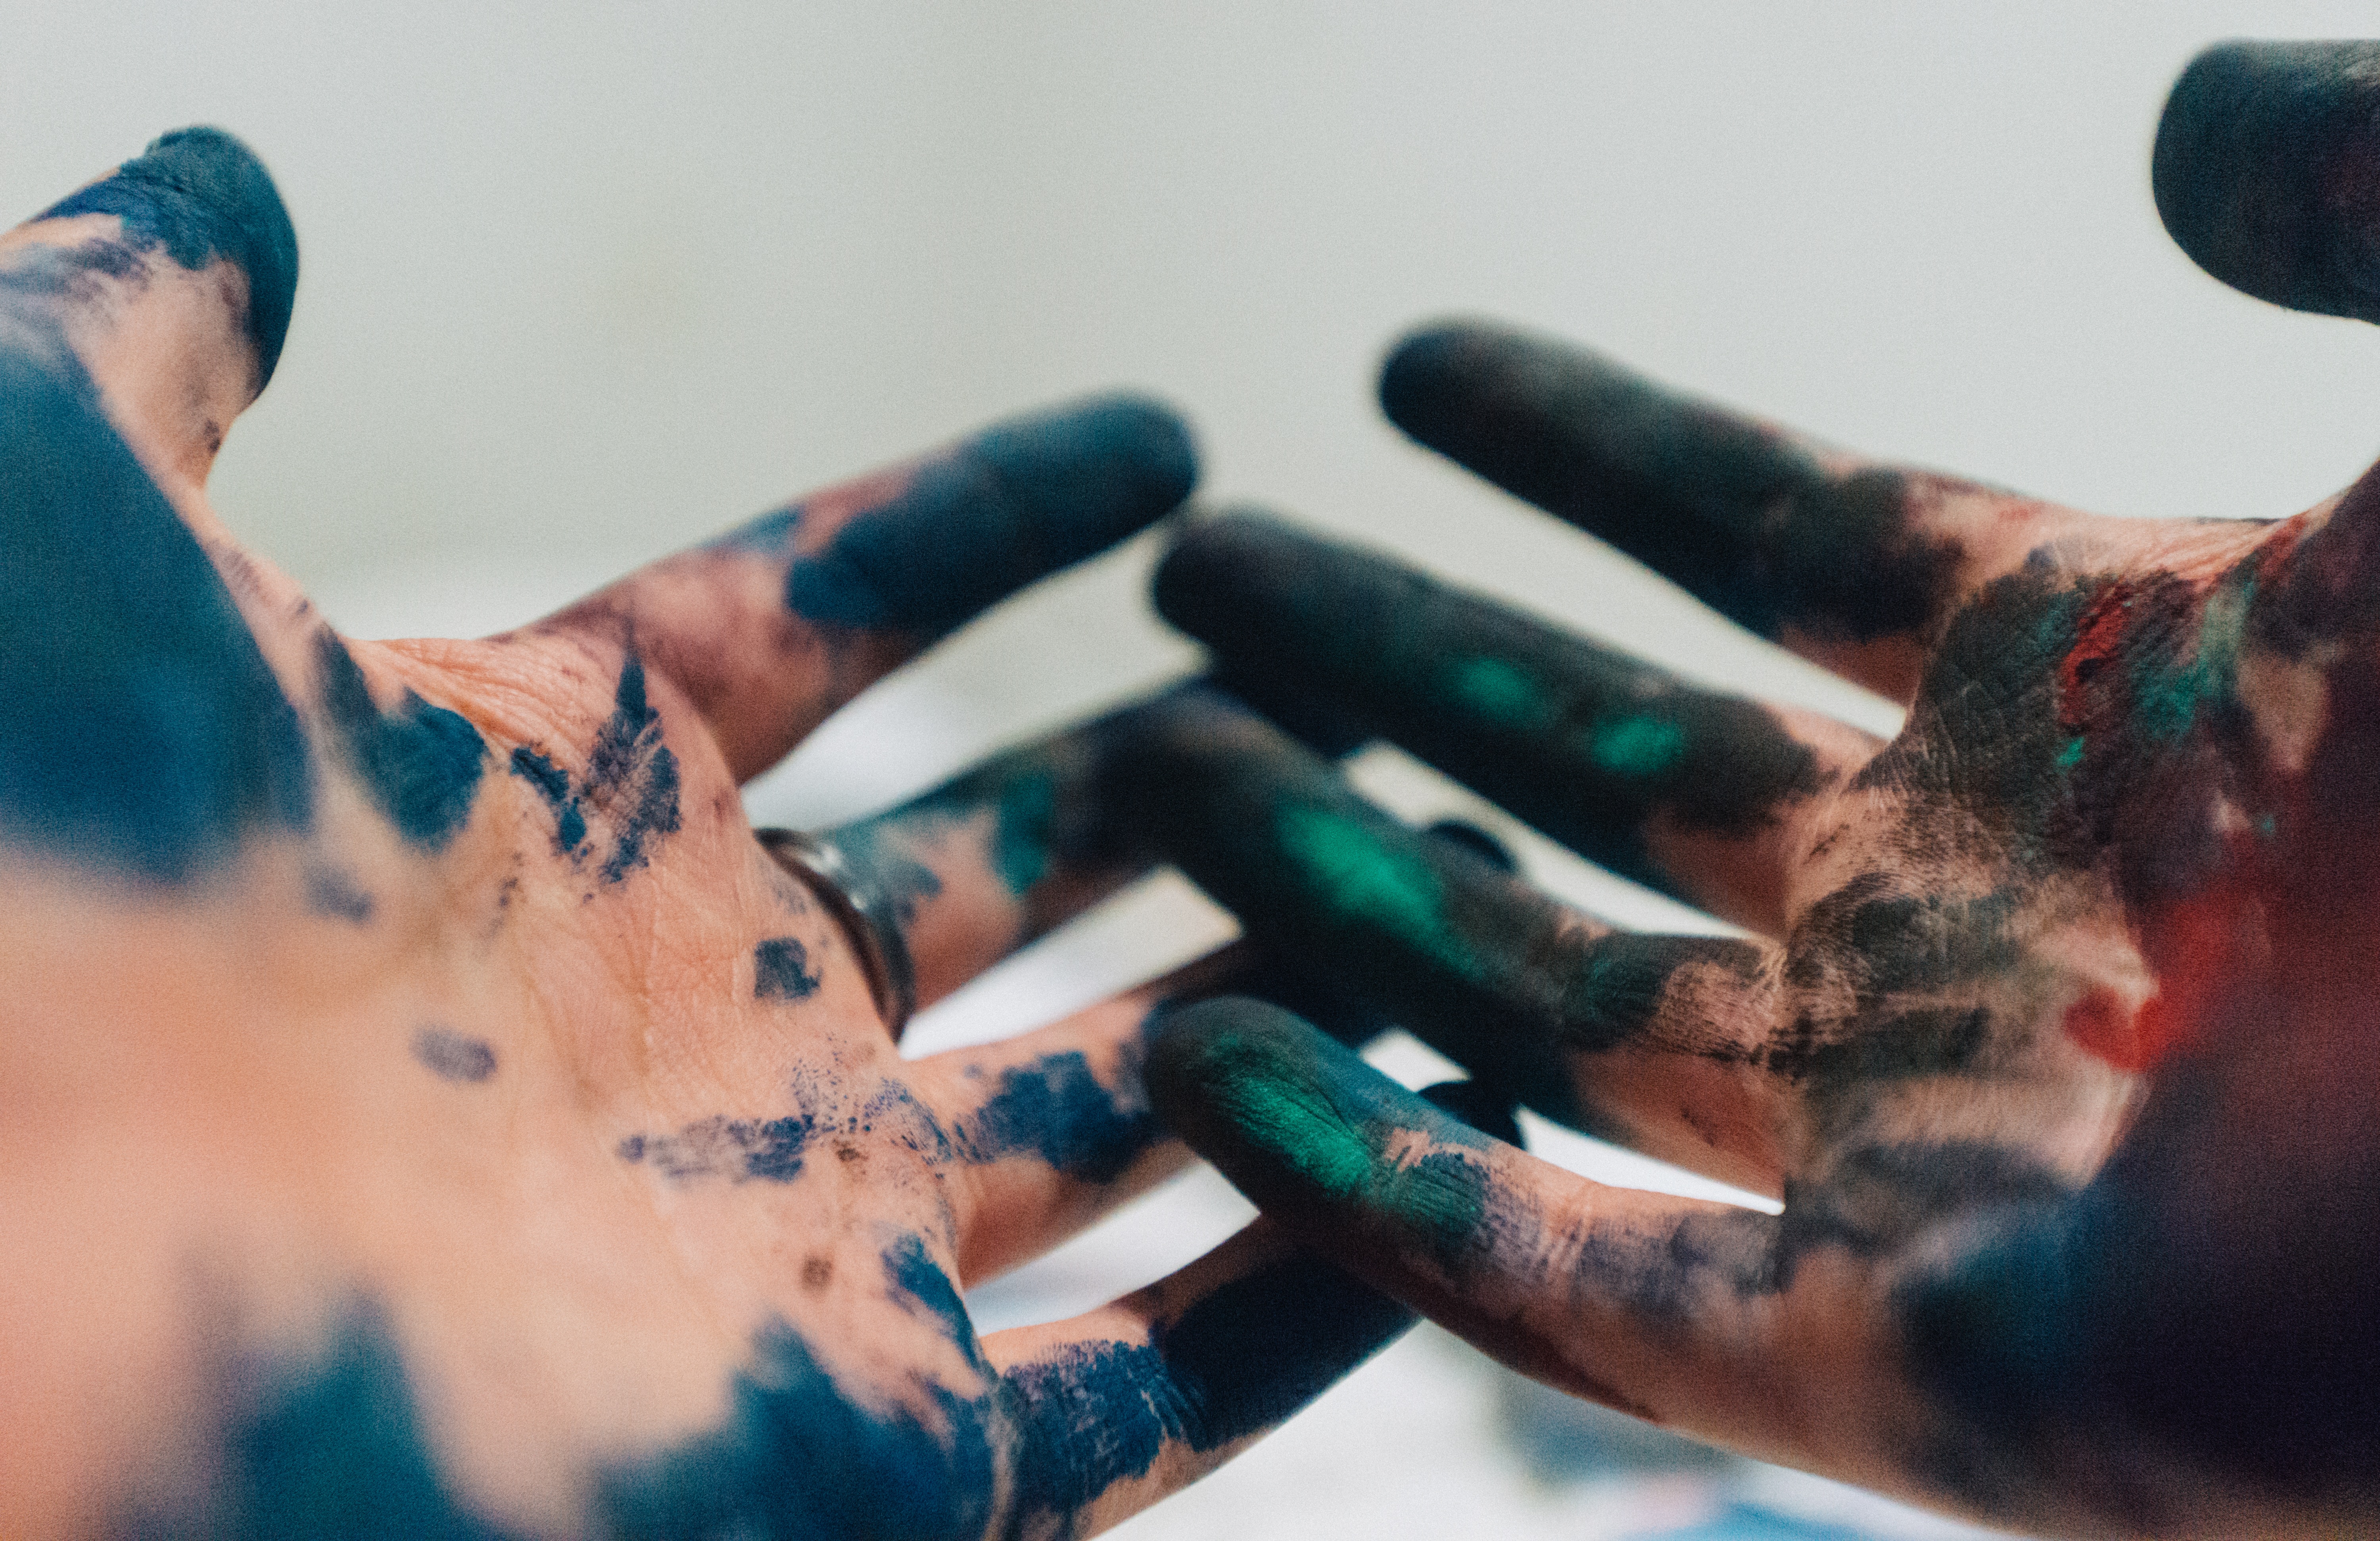 A pair of hands covered in paint.